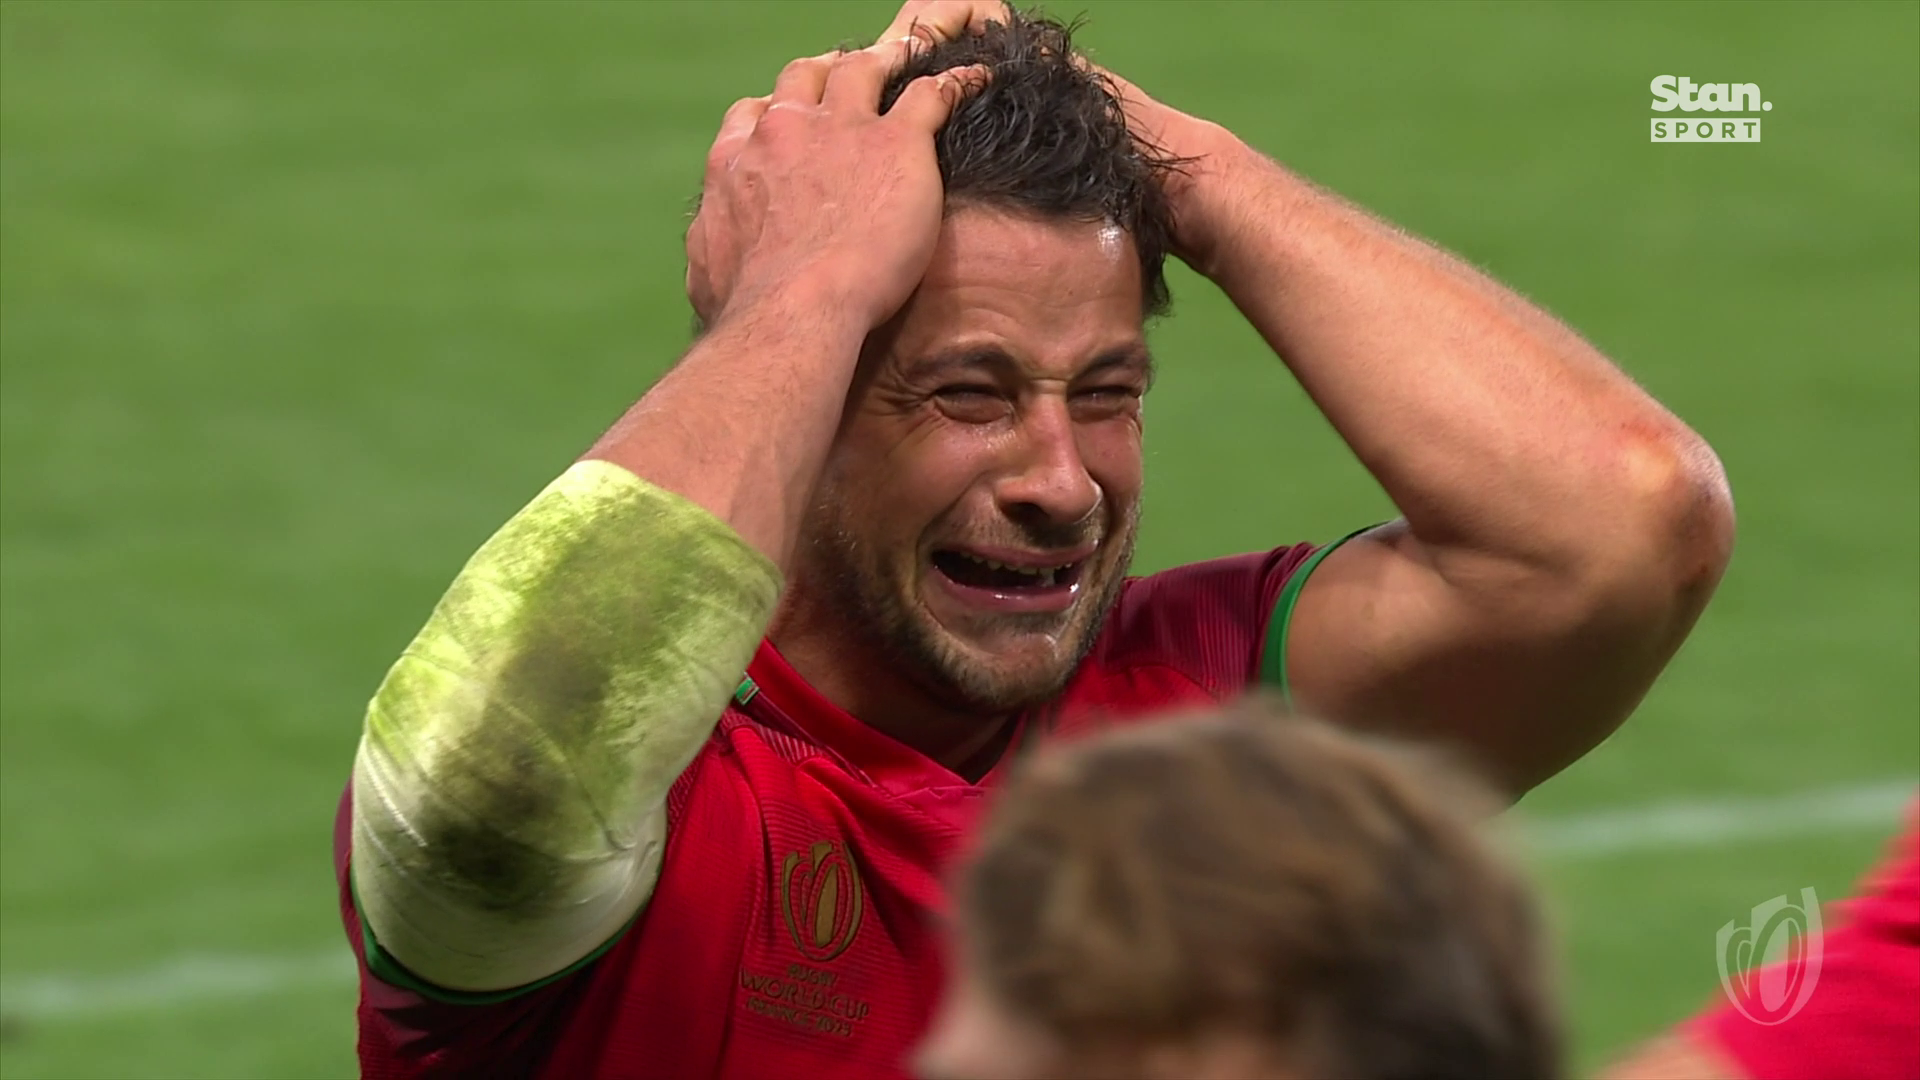 Portugal captain Jose Lima cries after his team defeated Fiji in the final pool match.